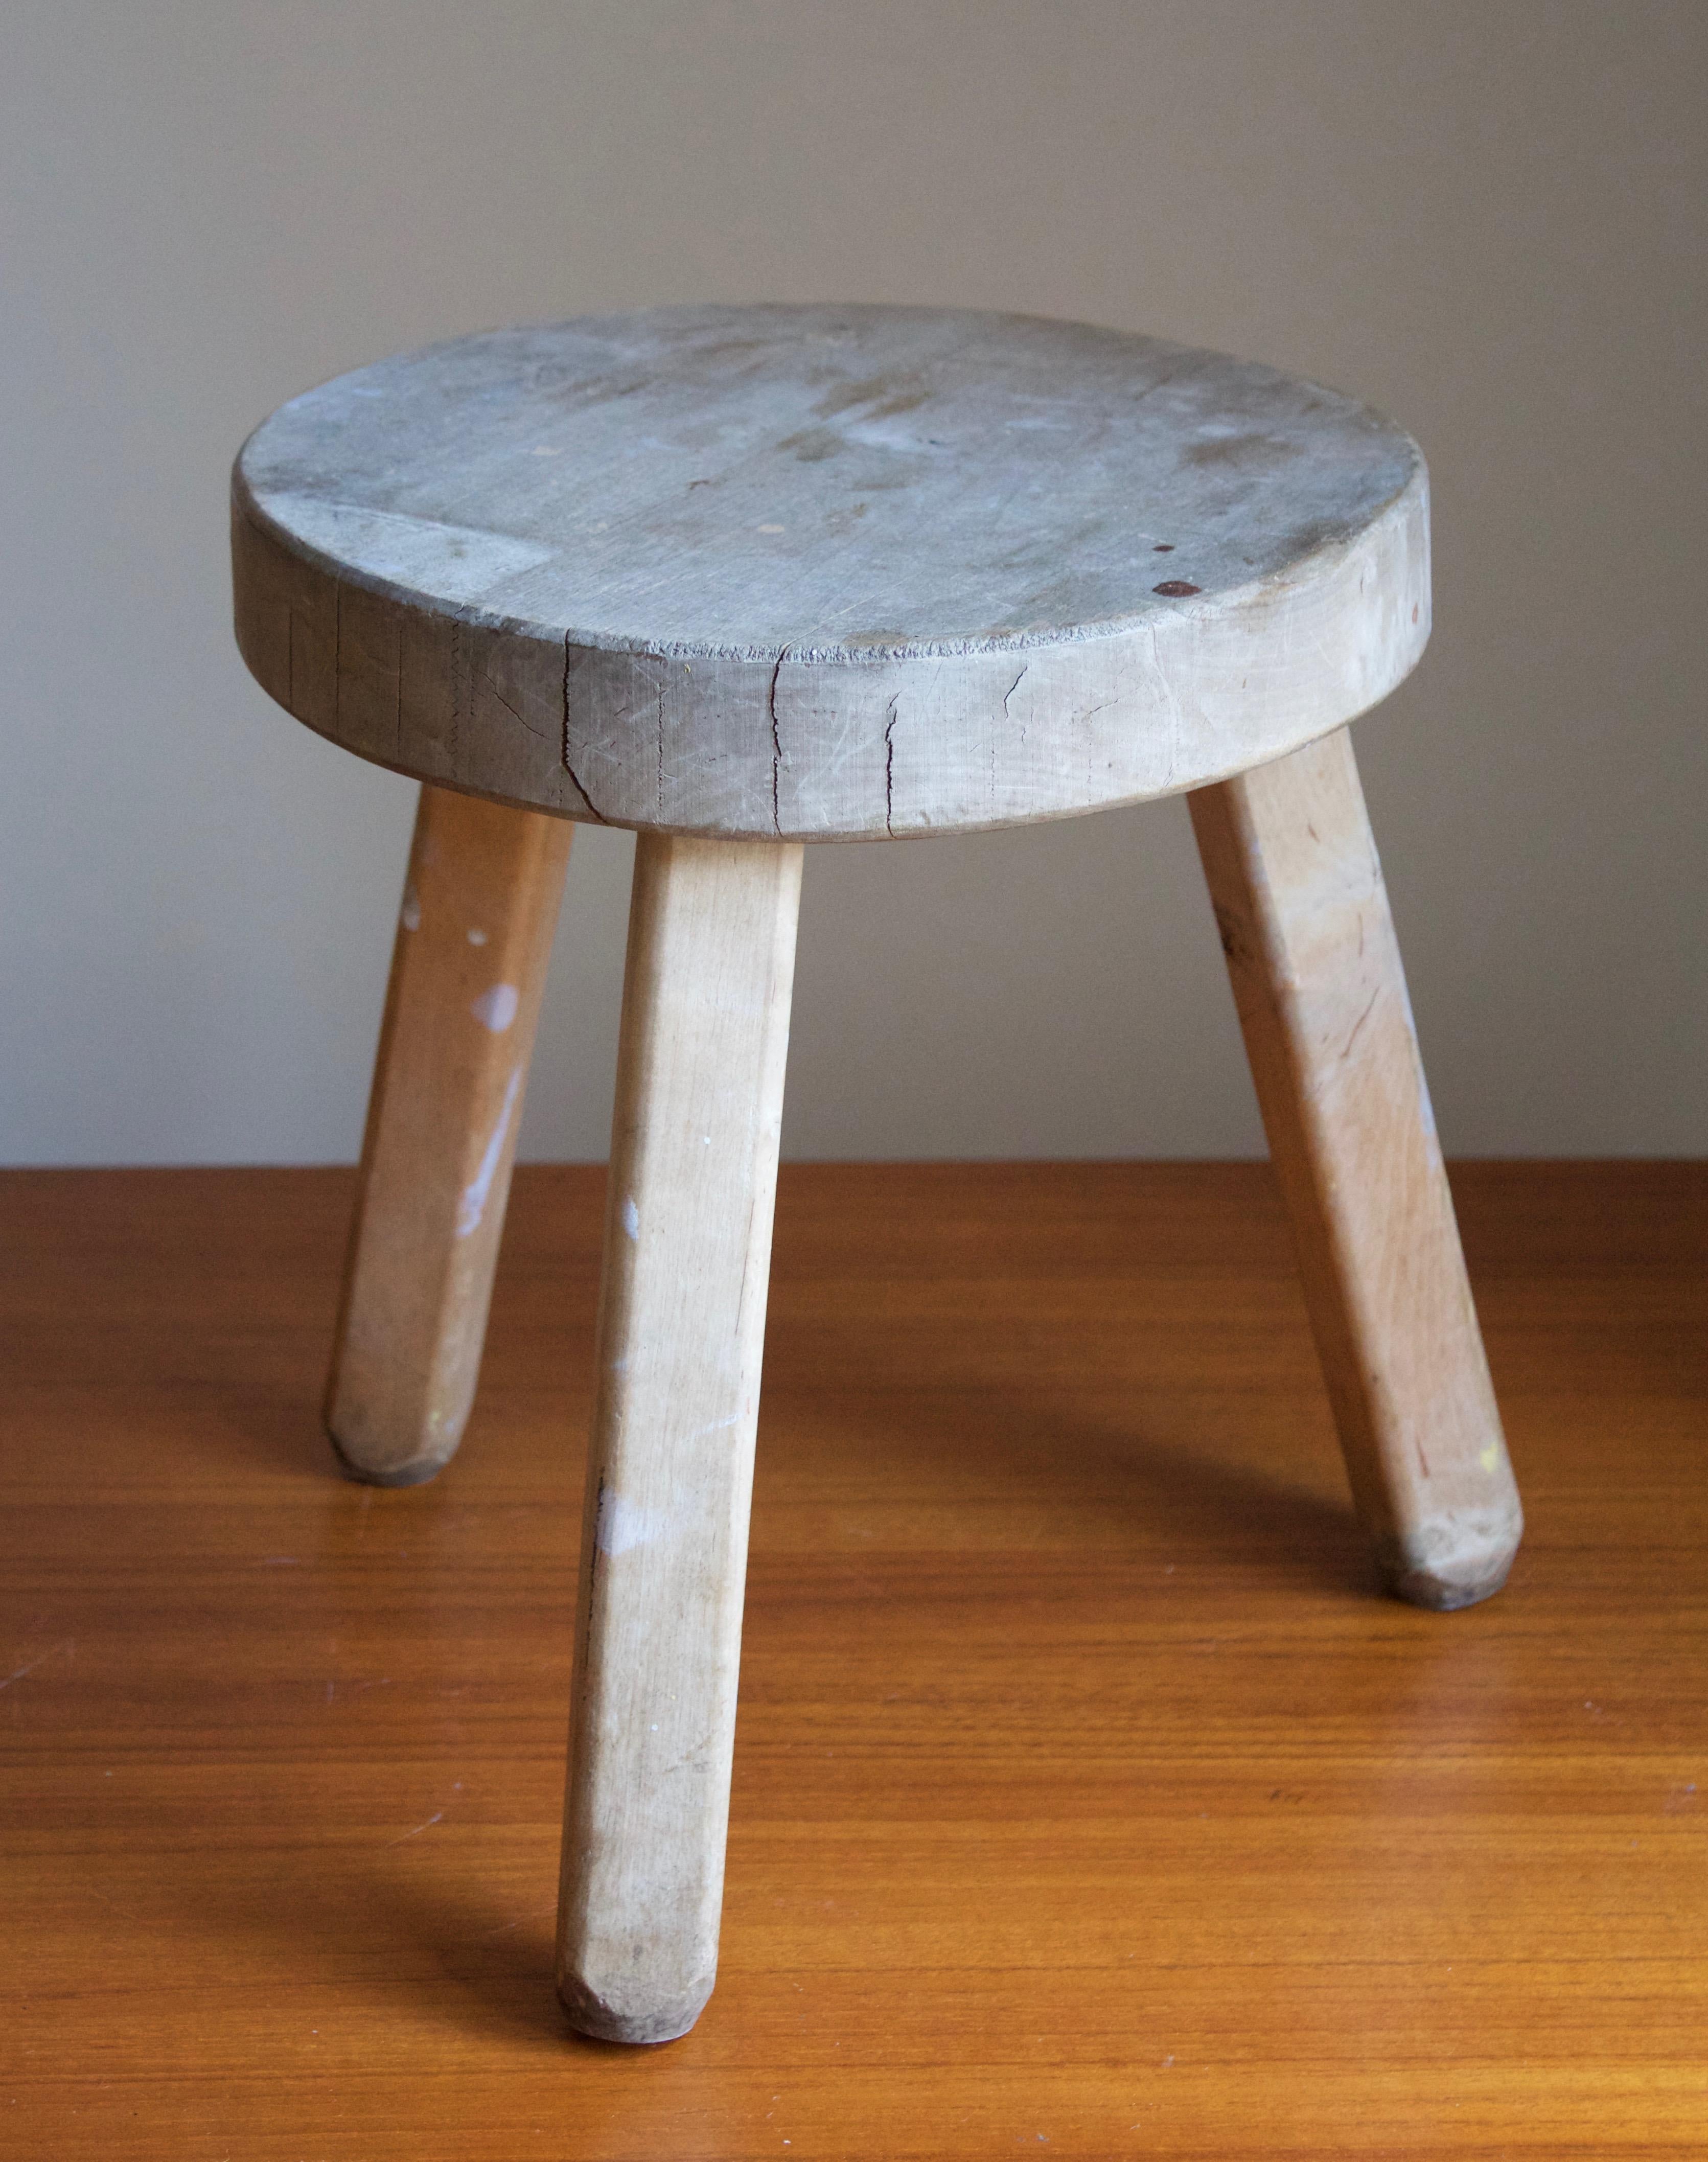 A simple and modernist stool. Produced in Sweden, 1940s. In solid stained oak, with revealed joinery. 

Other designers of the period include Axel Einar Hjorth, Charlotte Perriand, Pierre Jeanneret, Pierre Chapo, and Kaare Klint.